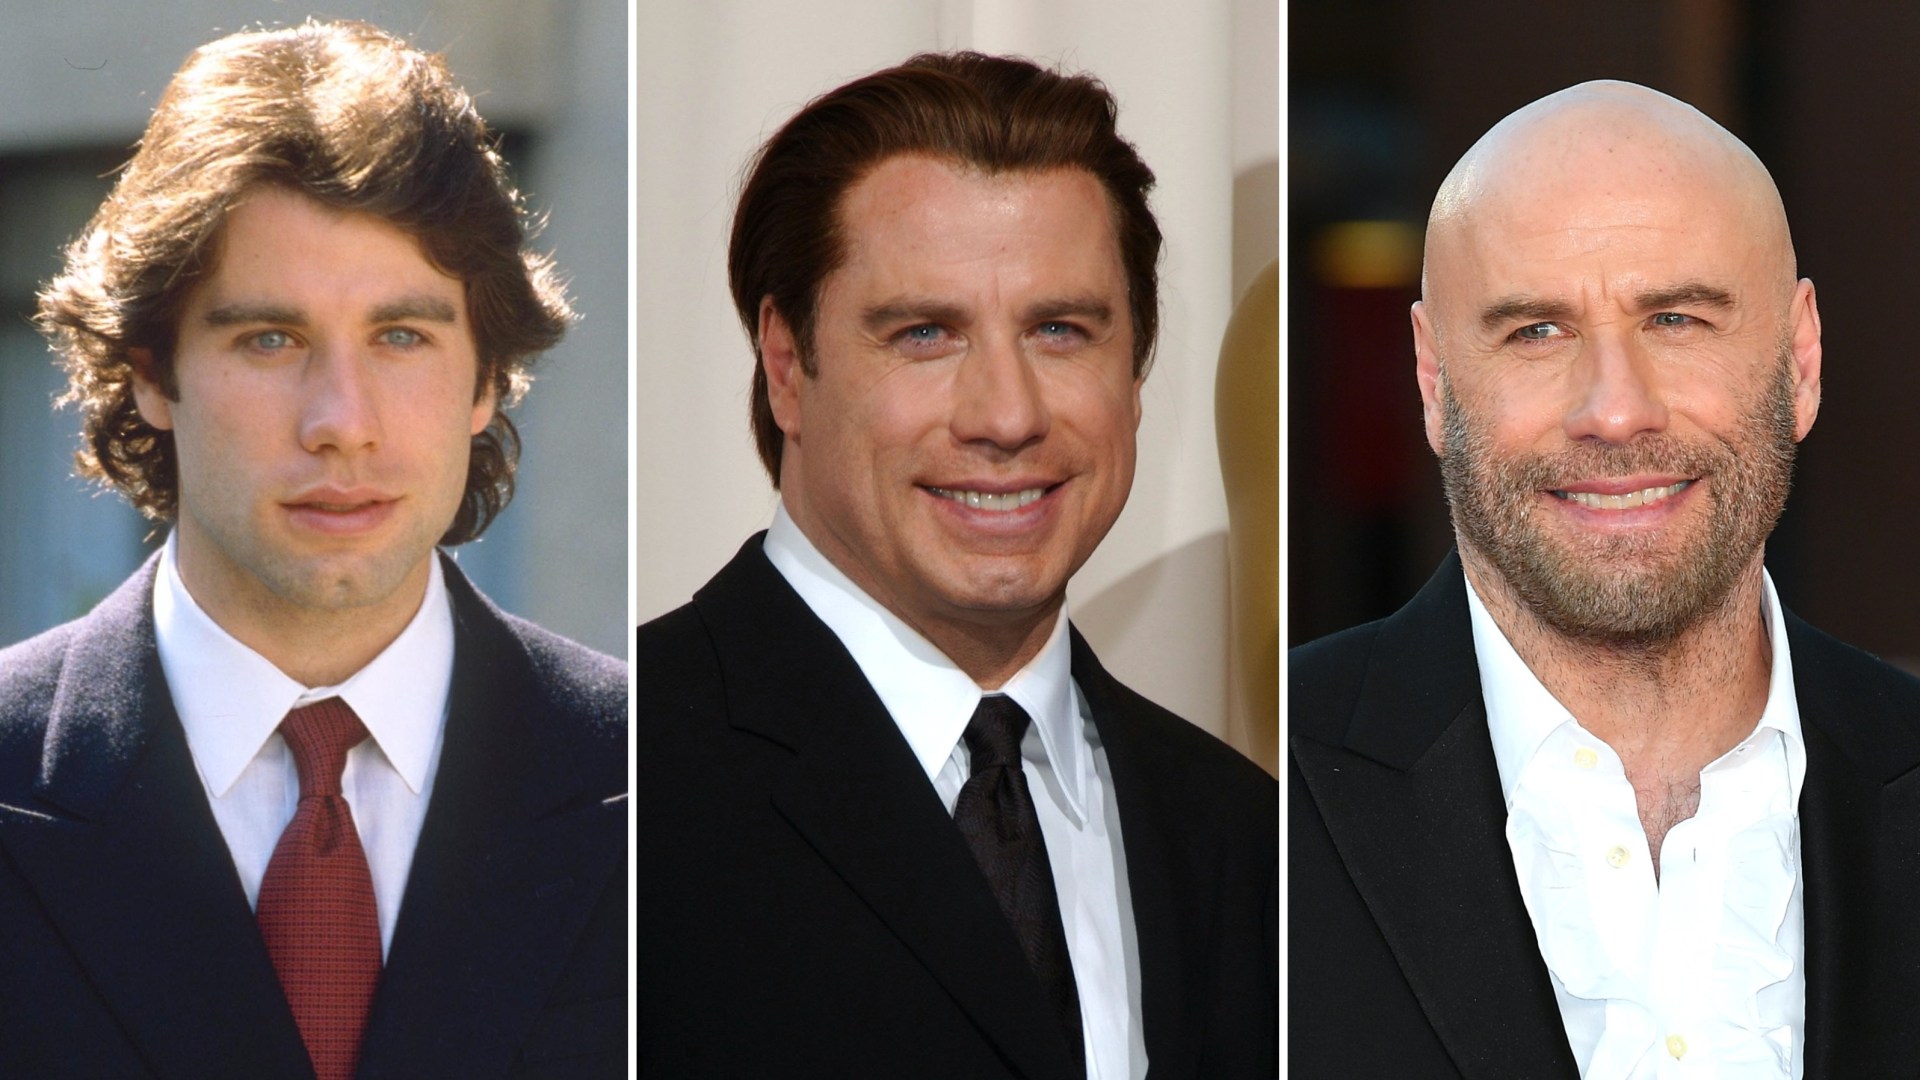 John Travolta Then and Now Photos of the Actor's Transformation